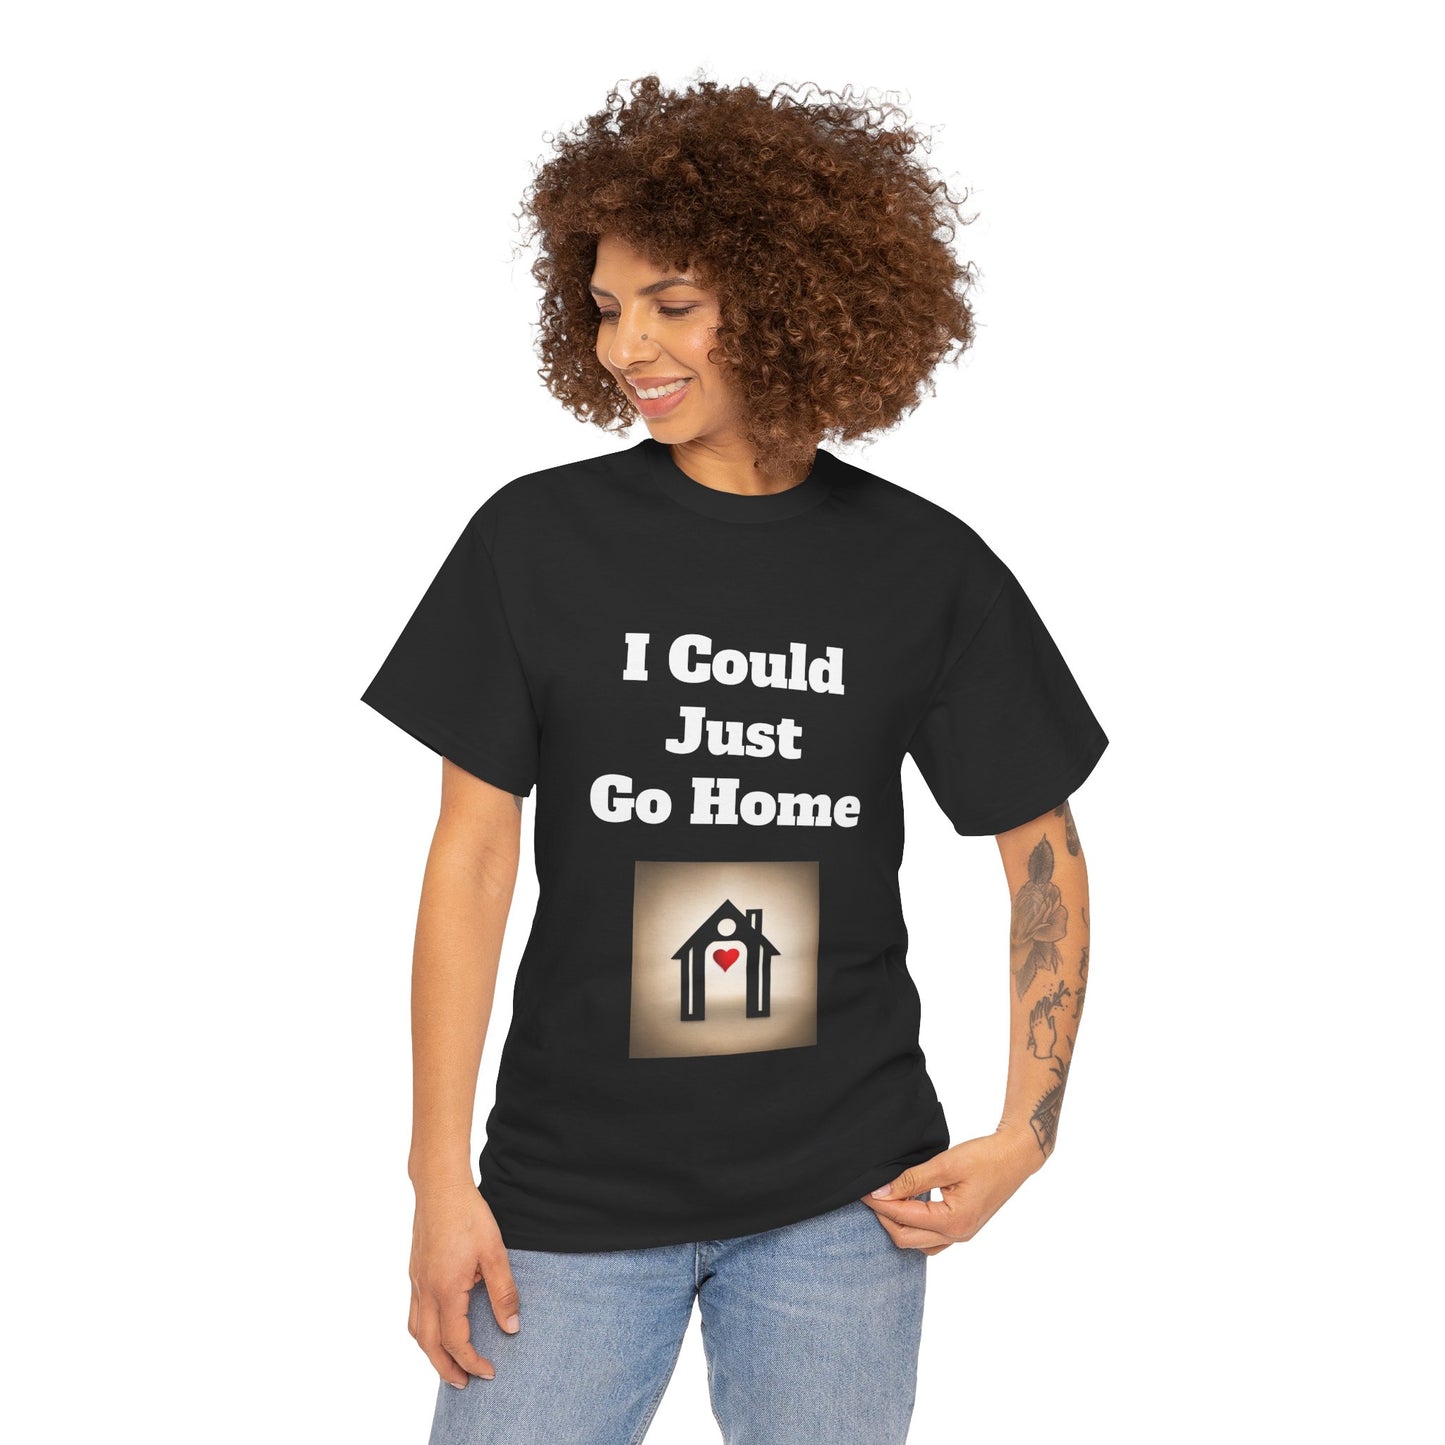 I Could Just Go Home Tee (Black)